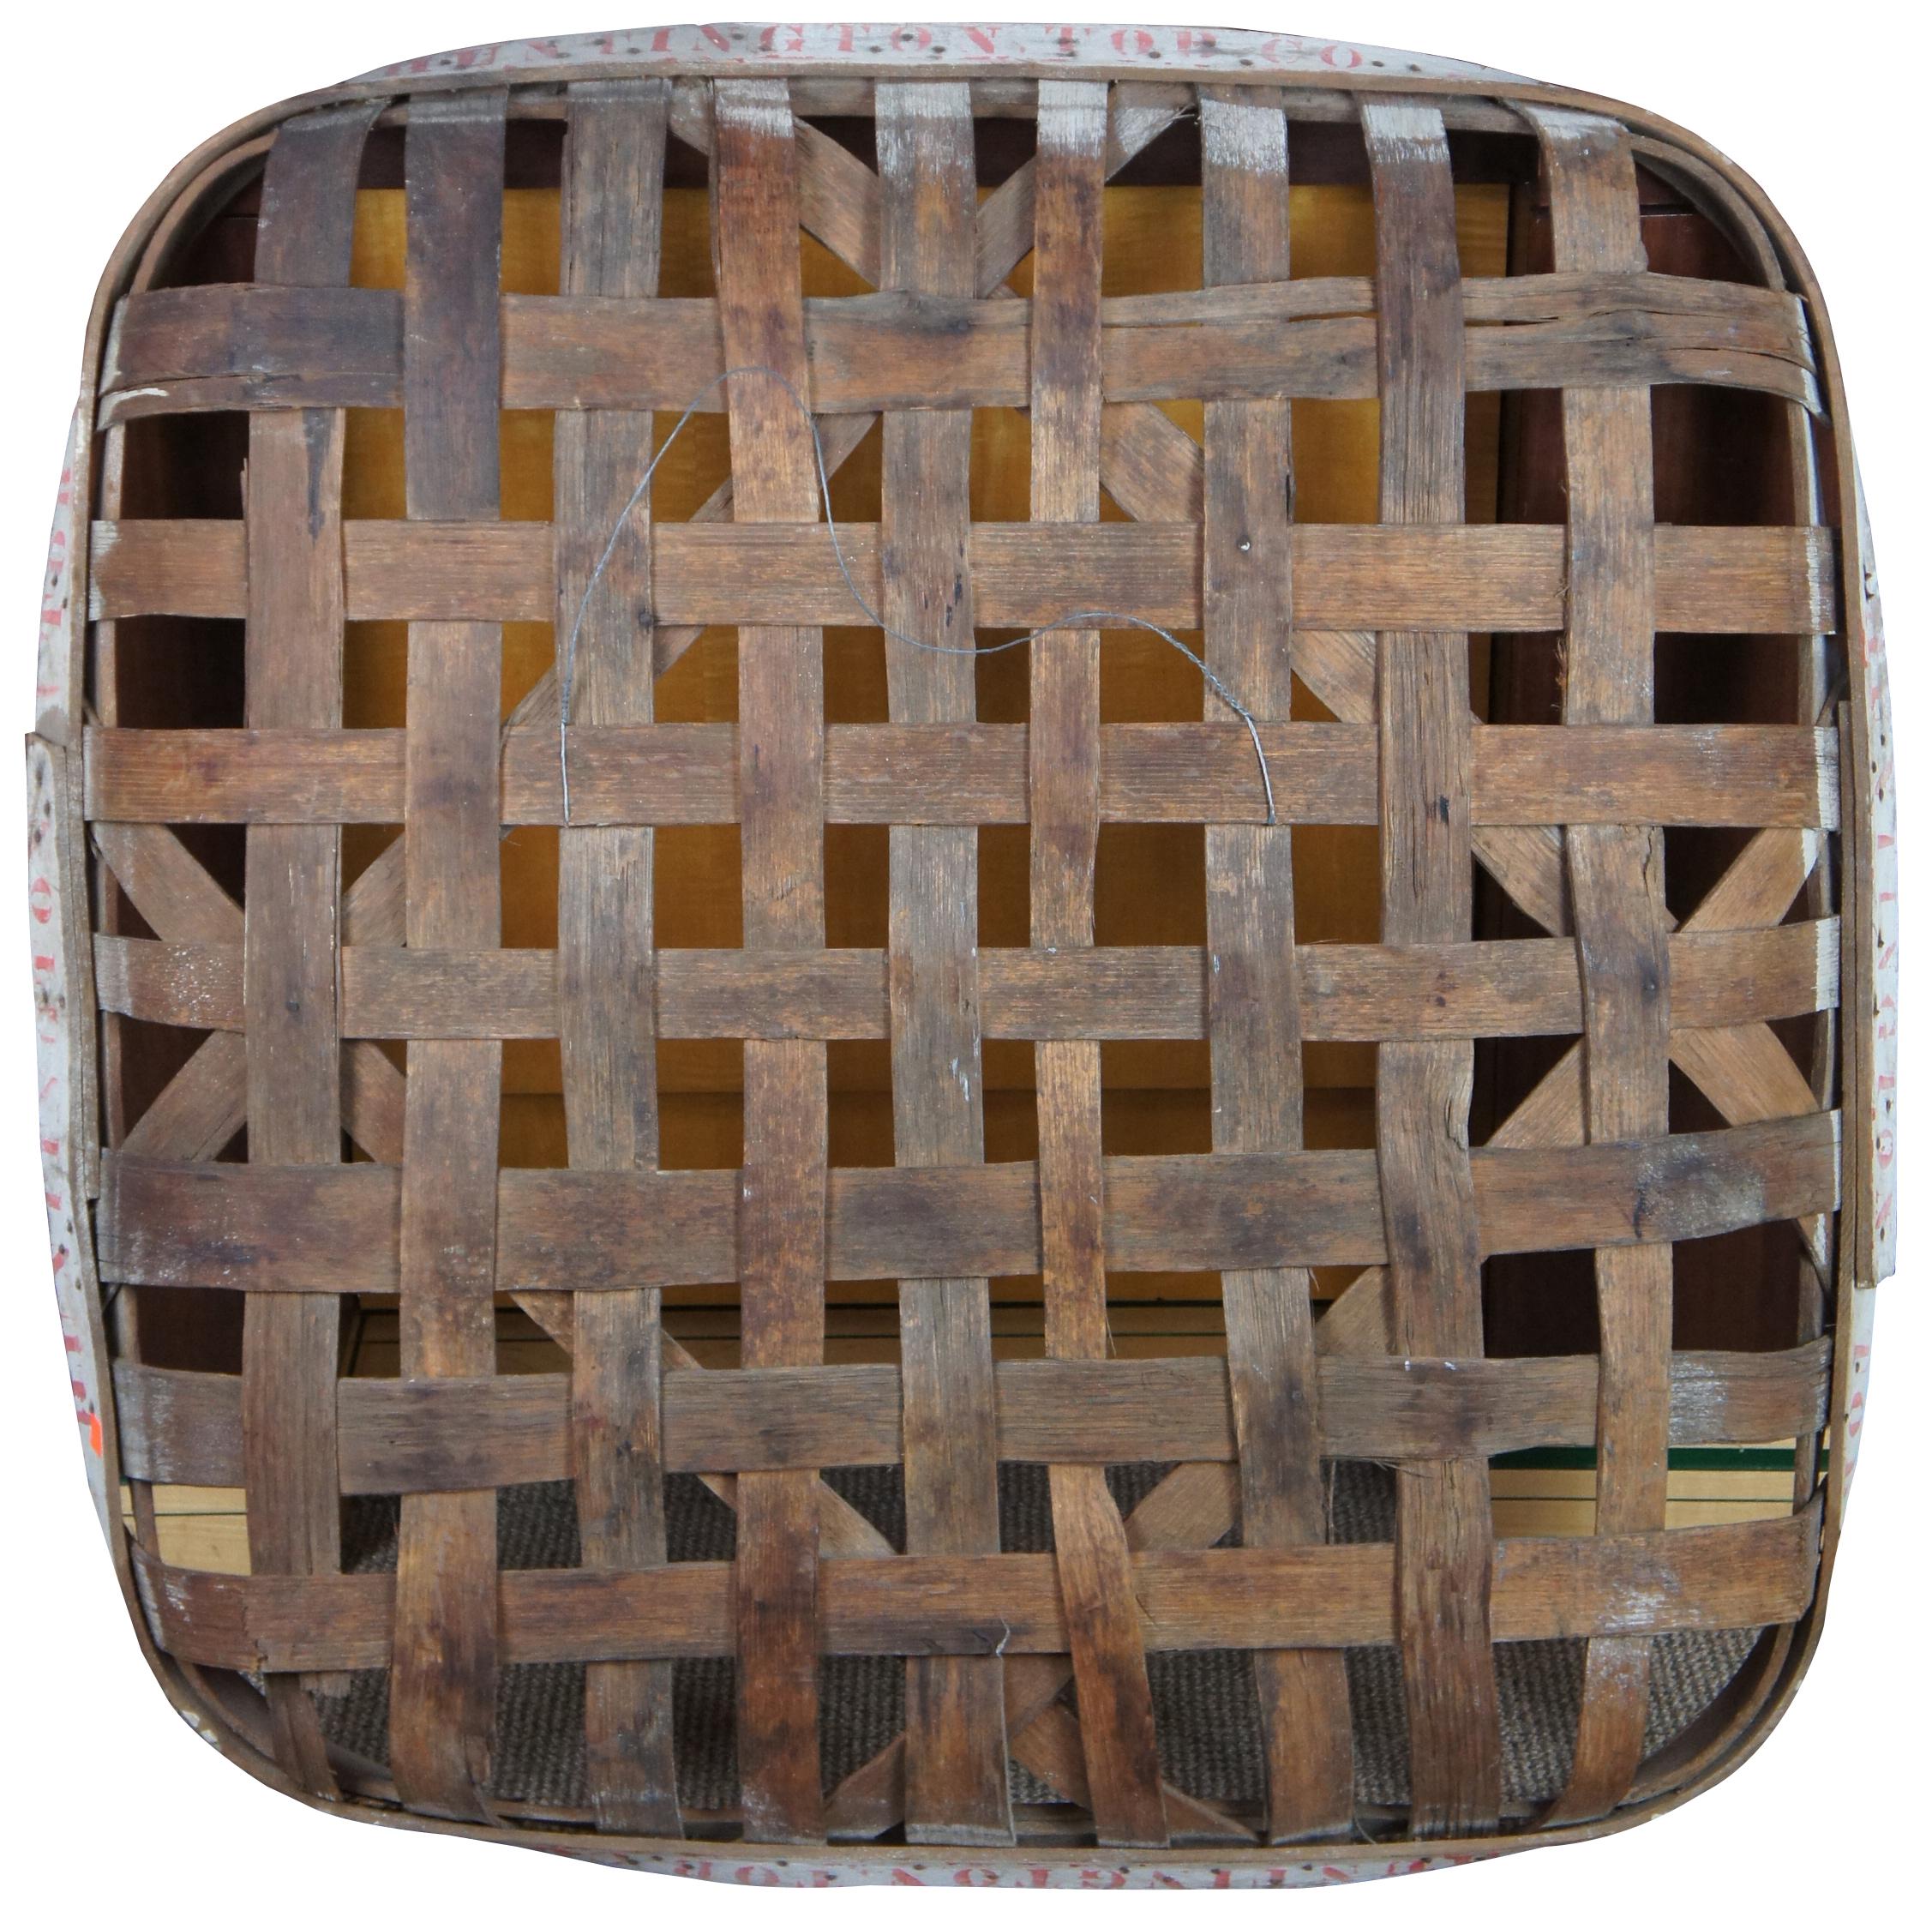 Antique tobacco basket by/from Huntington Tobacco Company. Features a traditional square shape with woven wood supports and Huntington Tobacco Company writing/stamping along the edge. Measure: 40